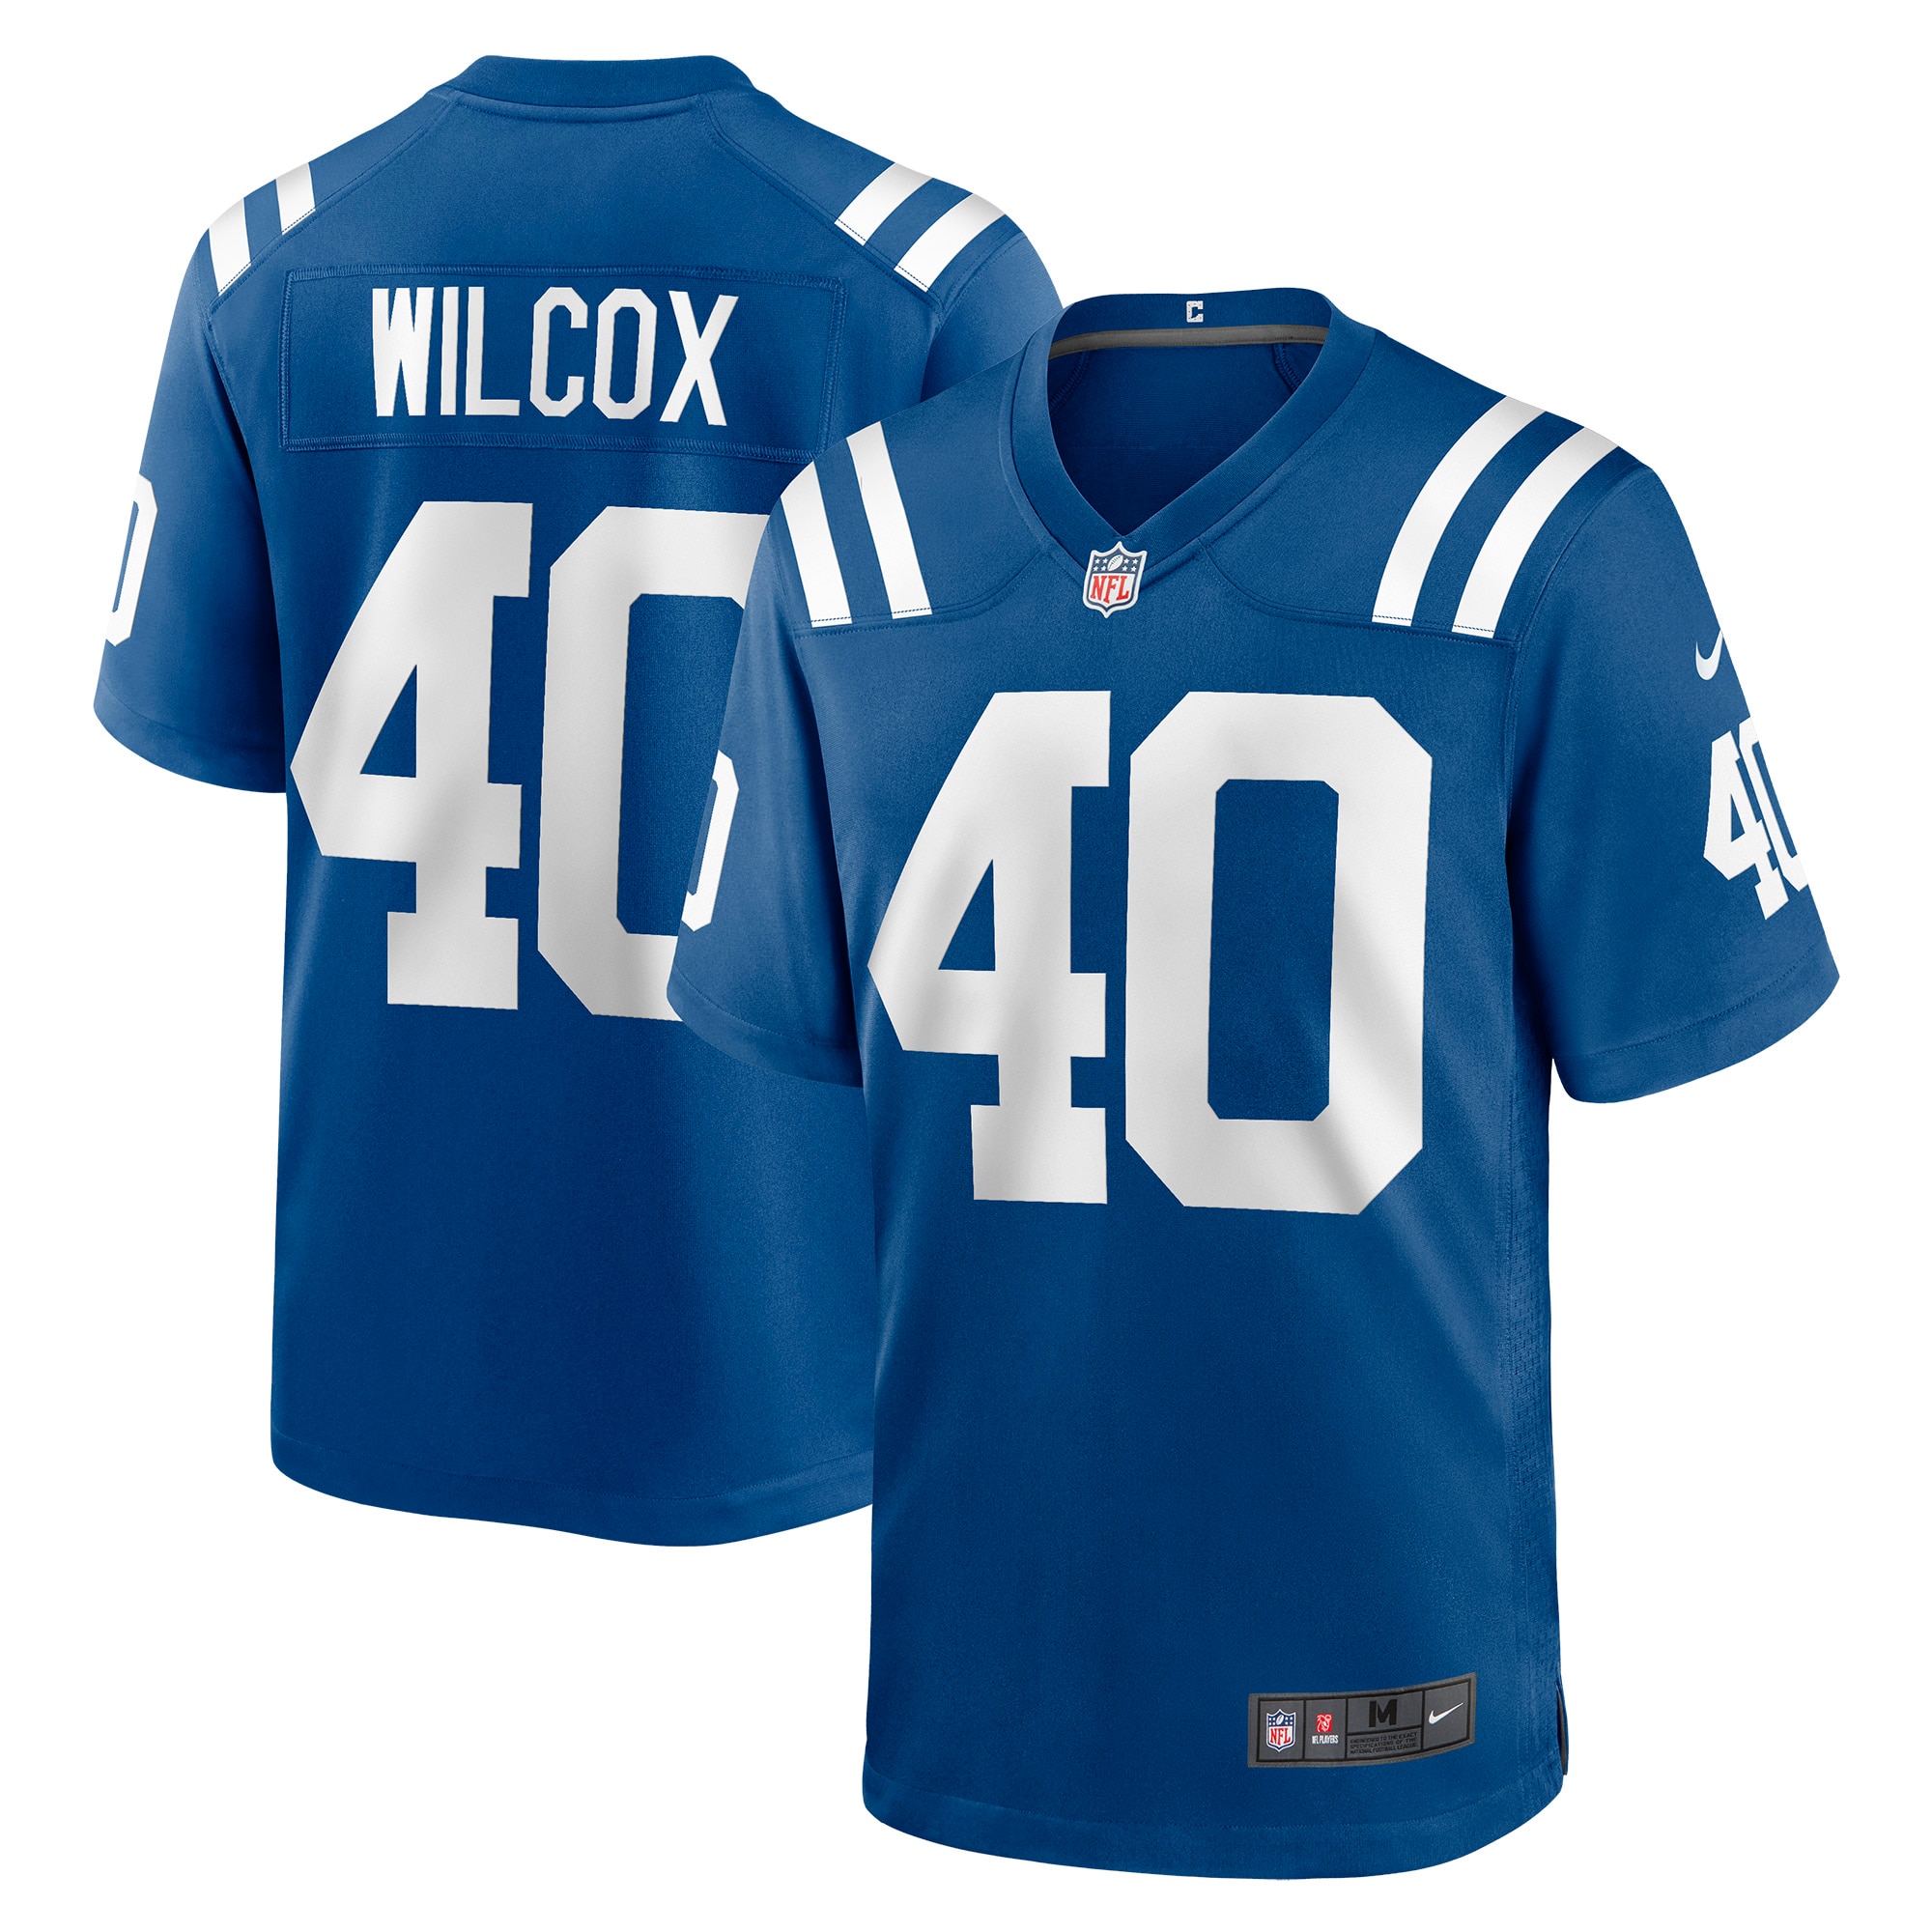 Men's Indianapolis Colts Jerseys Royal Chris Wilcox Game Style